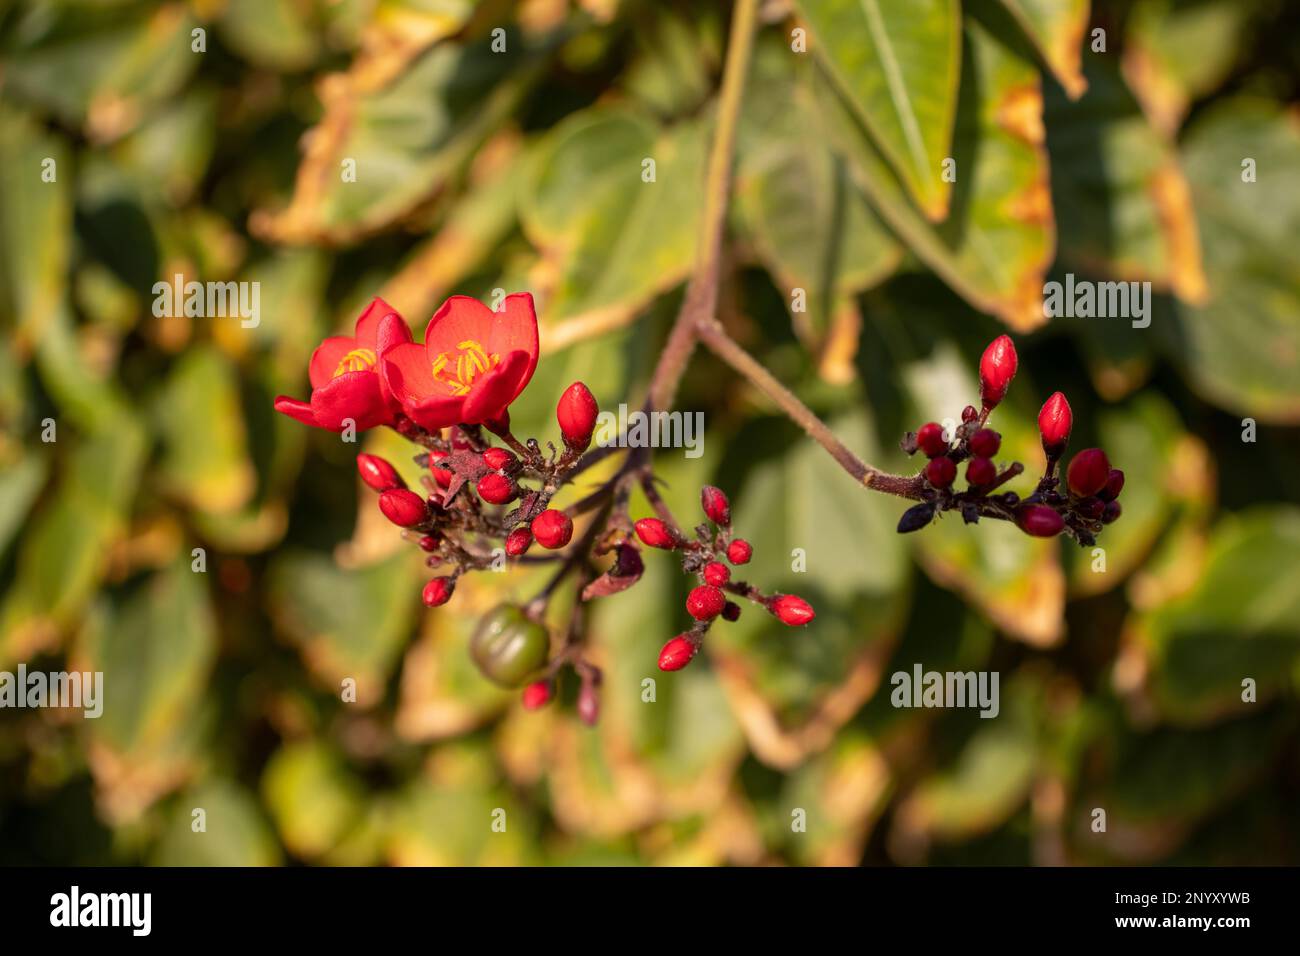 cluster of bright red tropical flowers isolated on a natural green background Stock Photo